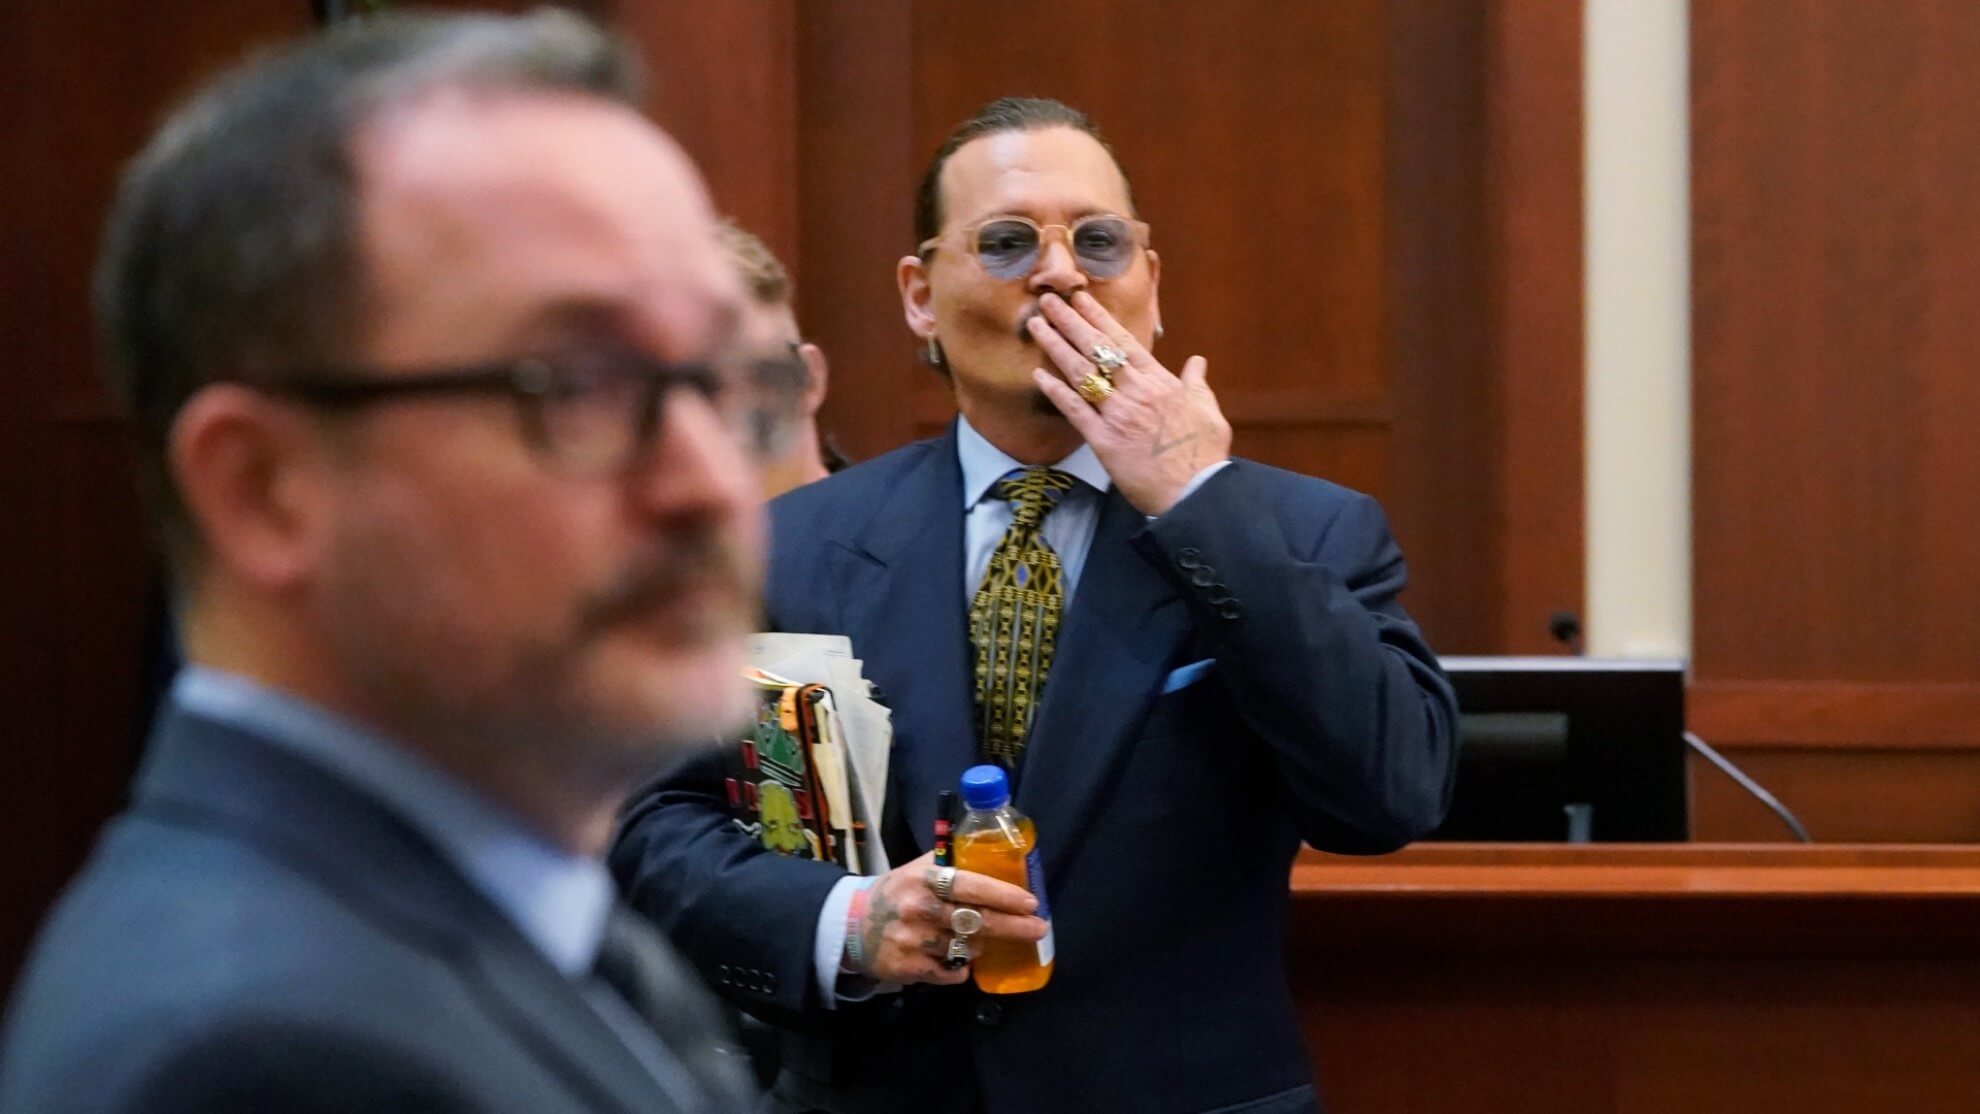 Johnny Depp in the courtroom.